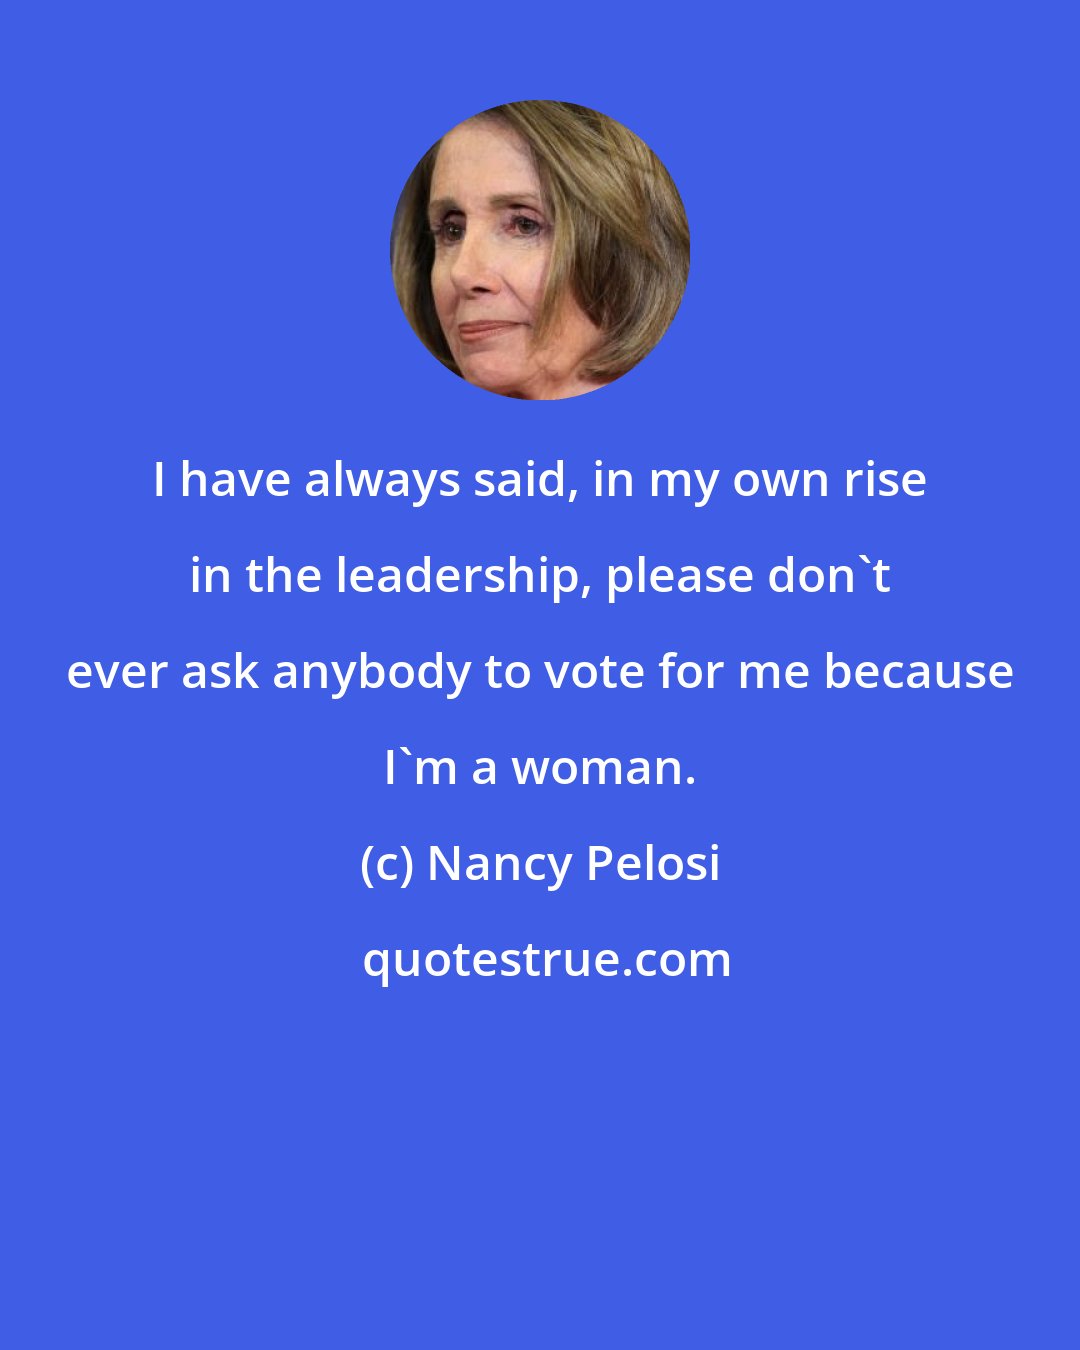 Nancy Pelosi: I have always said, in my own rise in the leadership, please don't ever ask anybody to vote for me because I'm a woman.